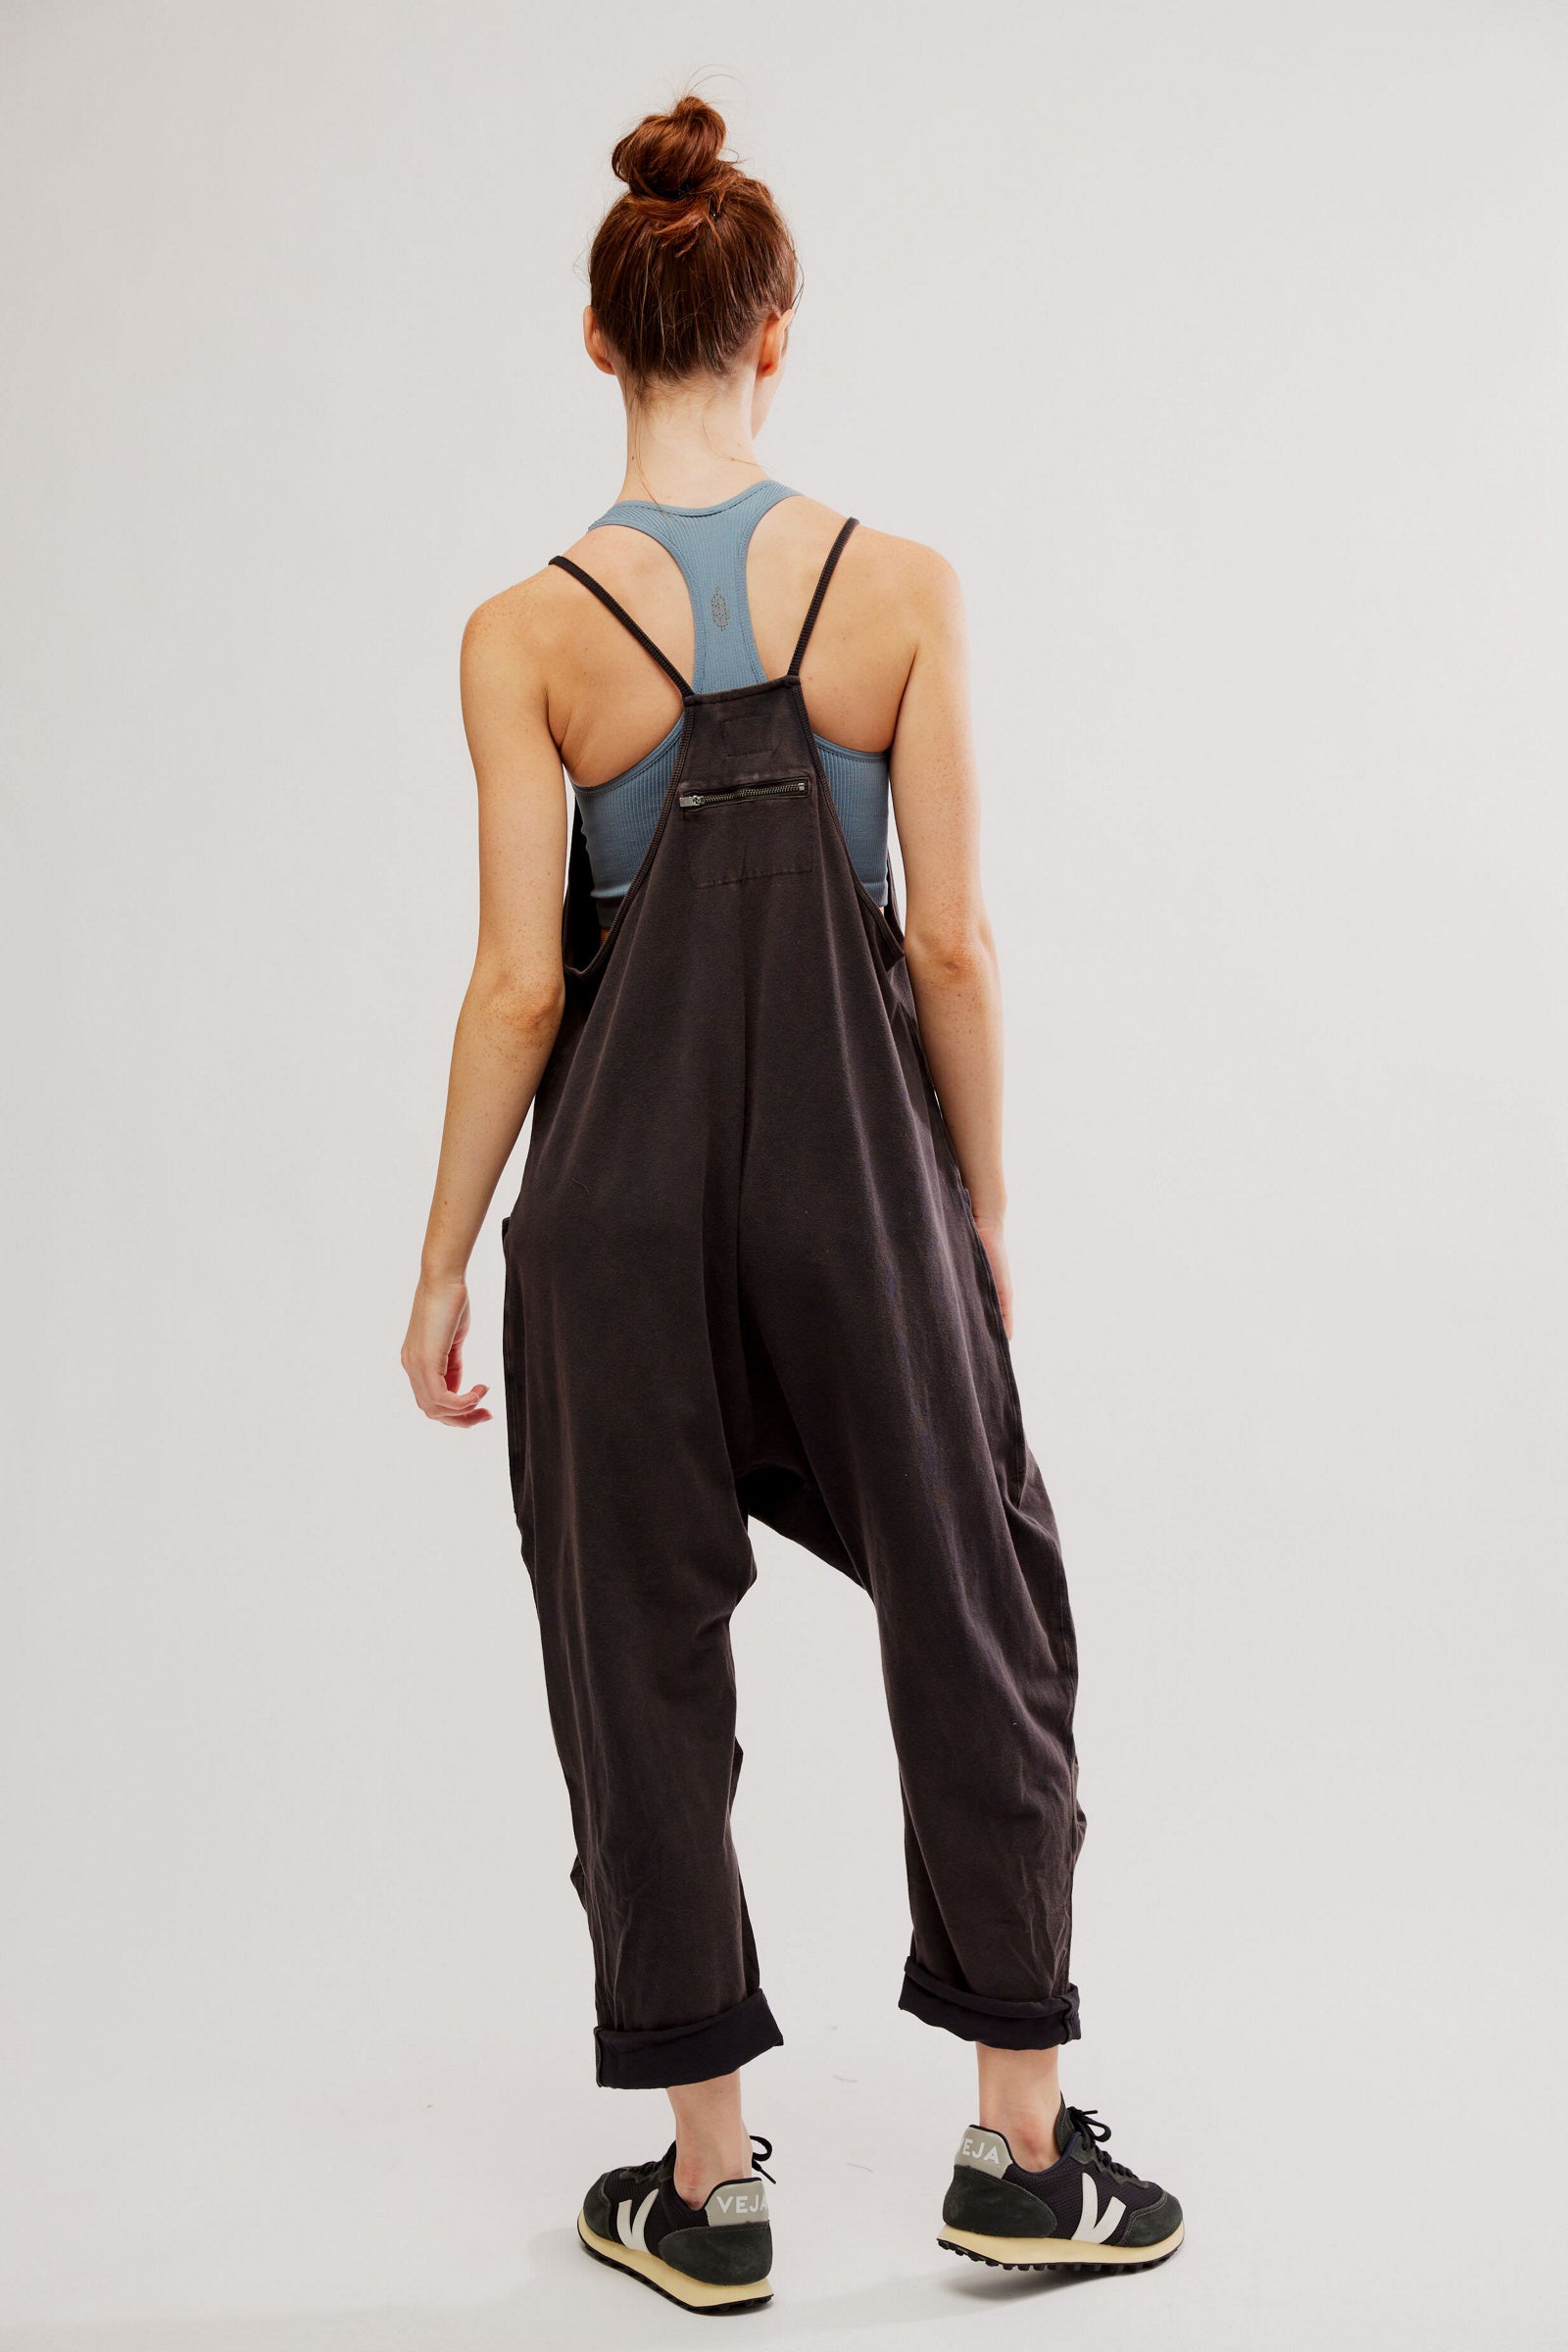 Hot Shot Onesie in Washed Black by Free People